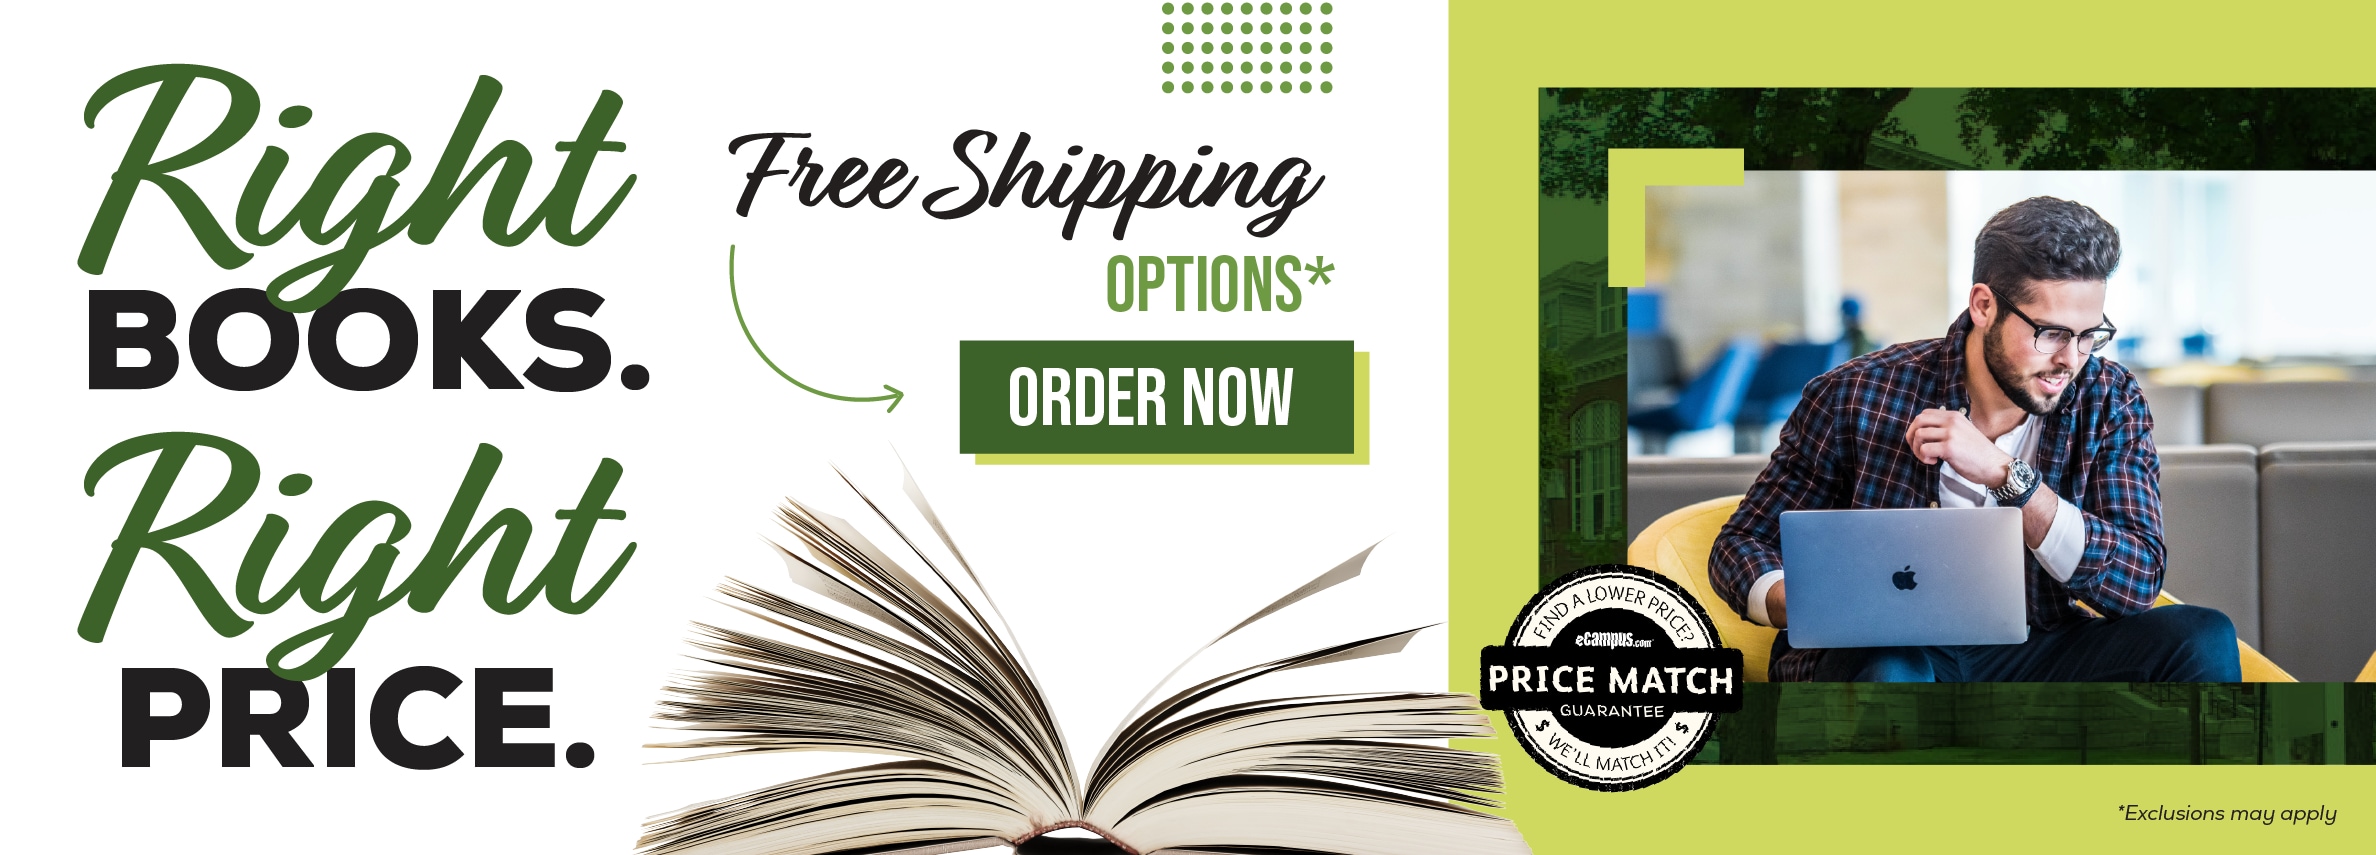 Right books. Right price. Free shipping options.* Order now. Price Match Guarantee. *Exclusions may apply.